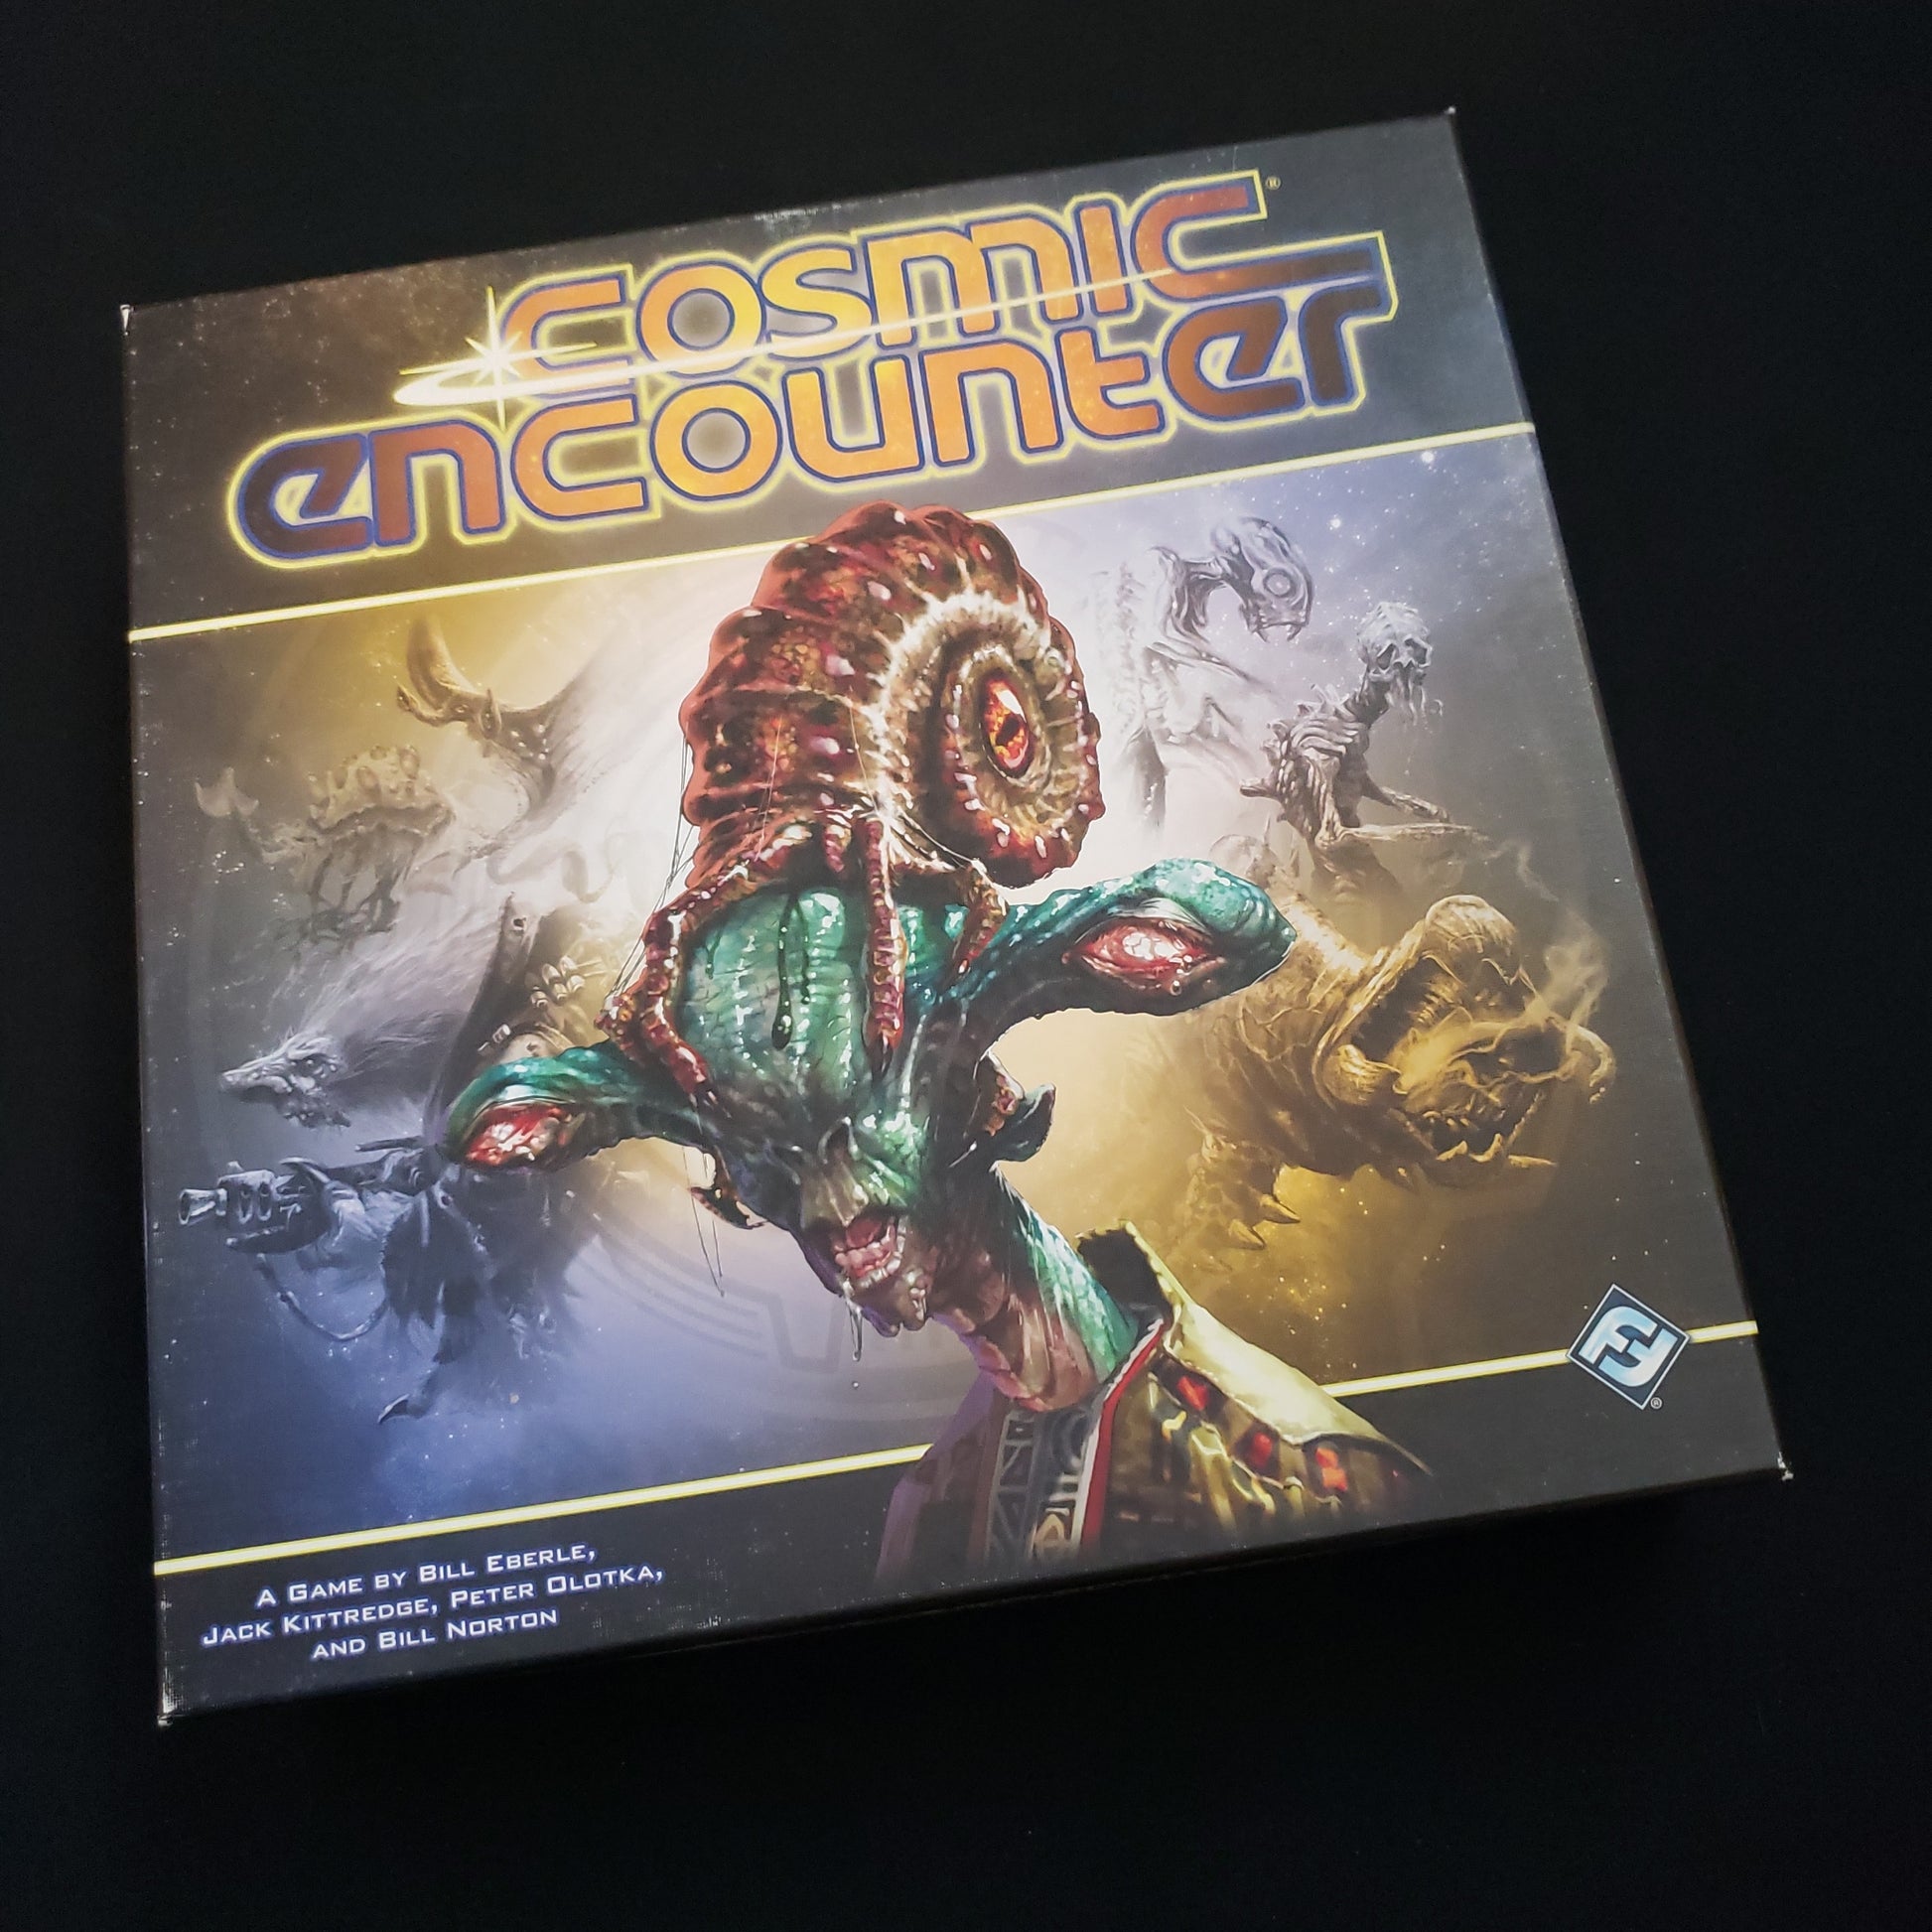 Image shows the front cover of the box of the Cosmic Encounter board game